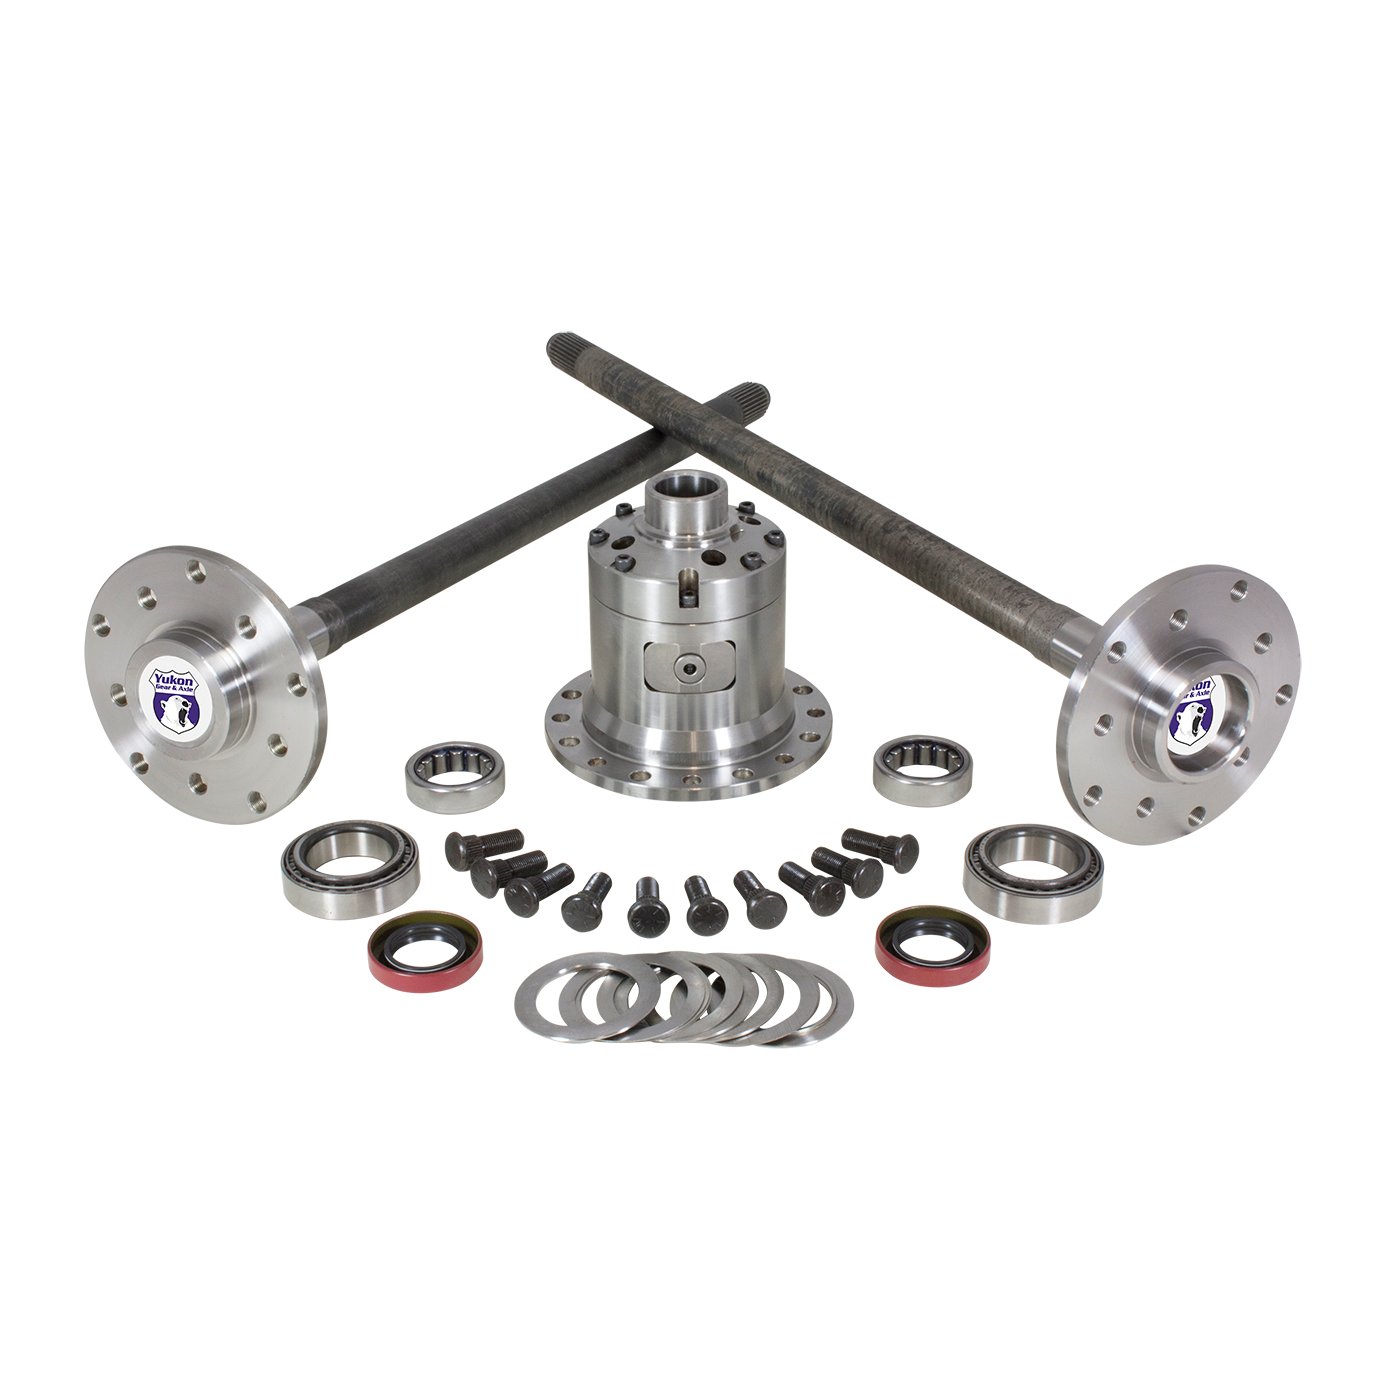 Ultimate 35 Axle Kit For C/Clip Axles With